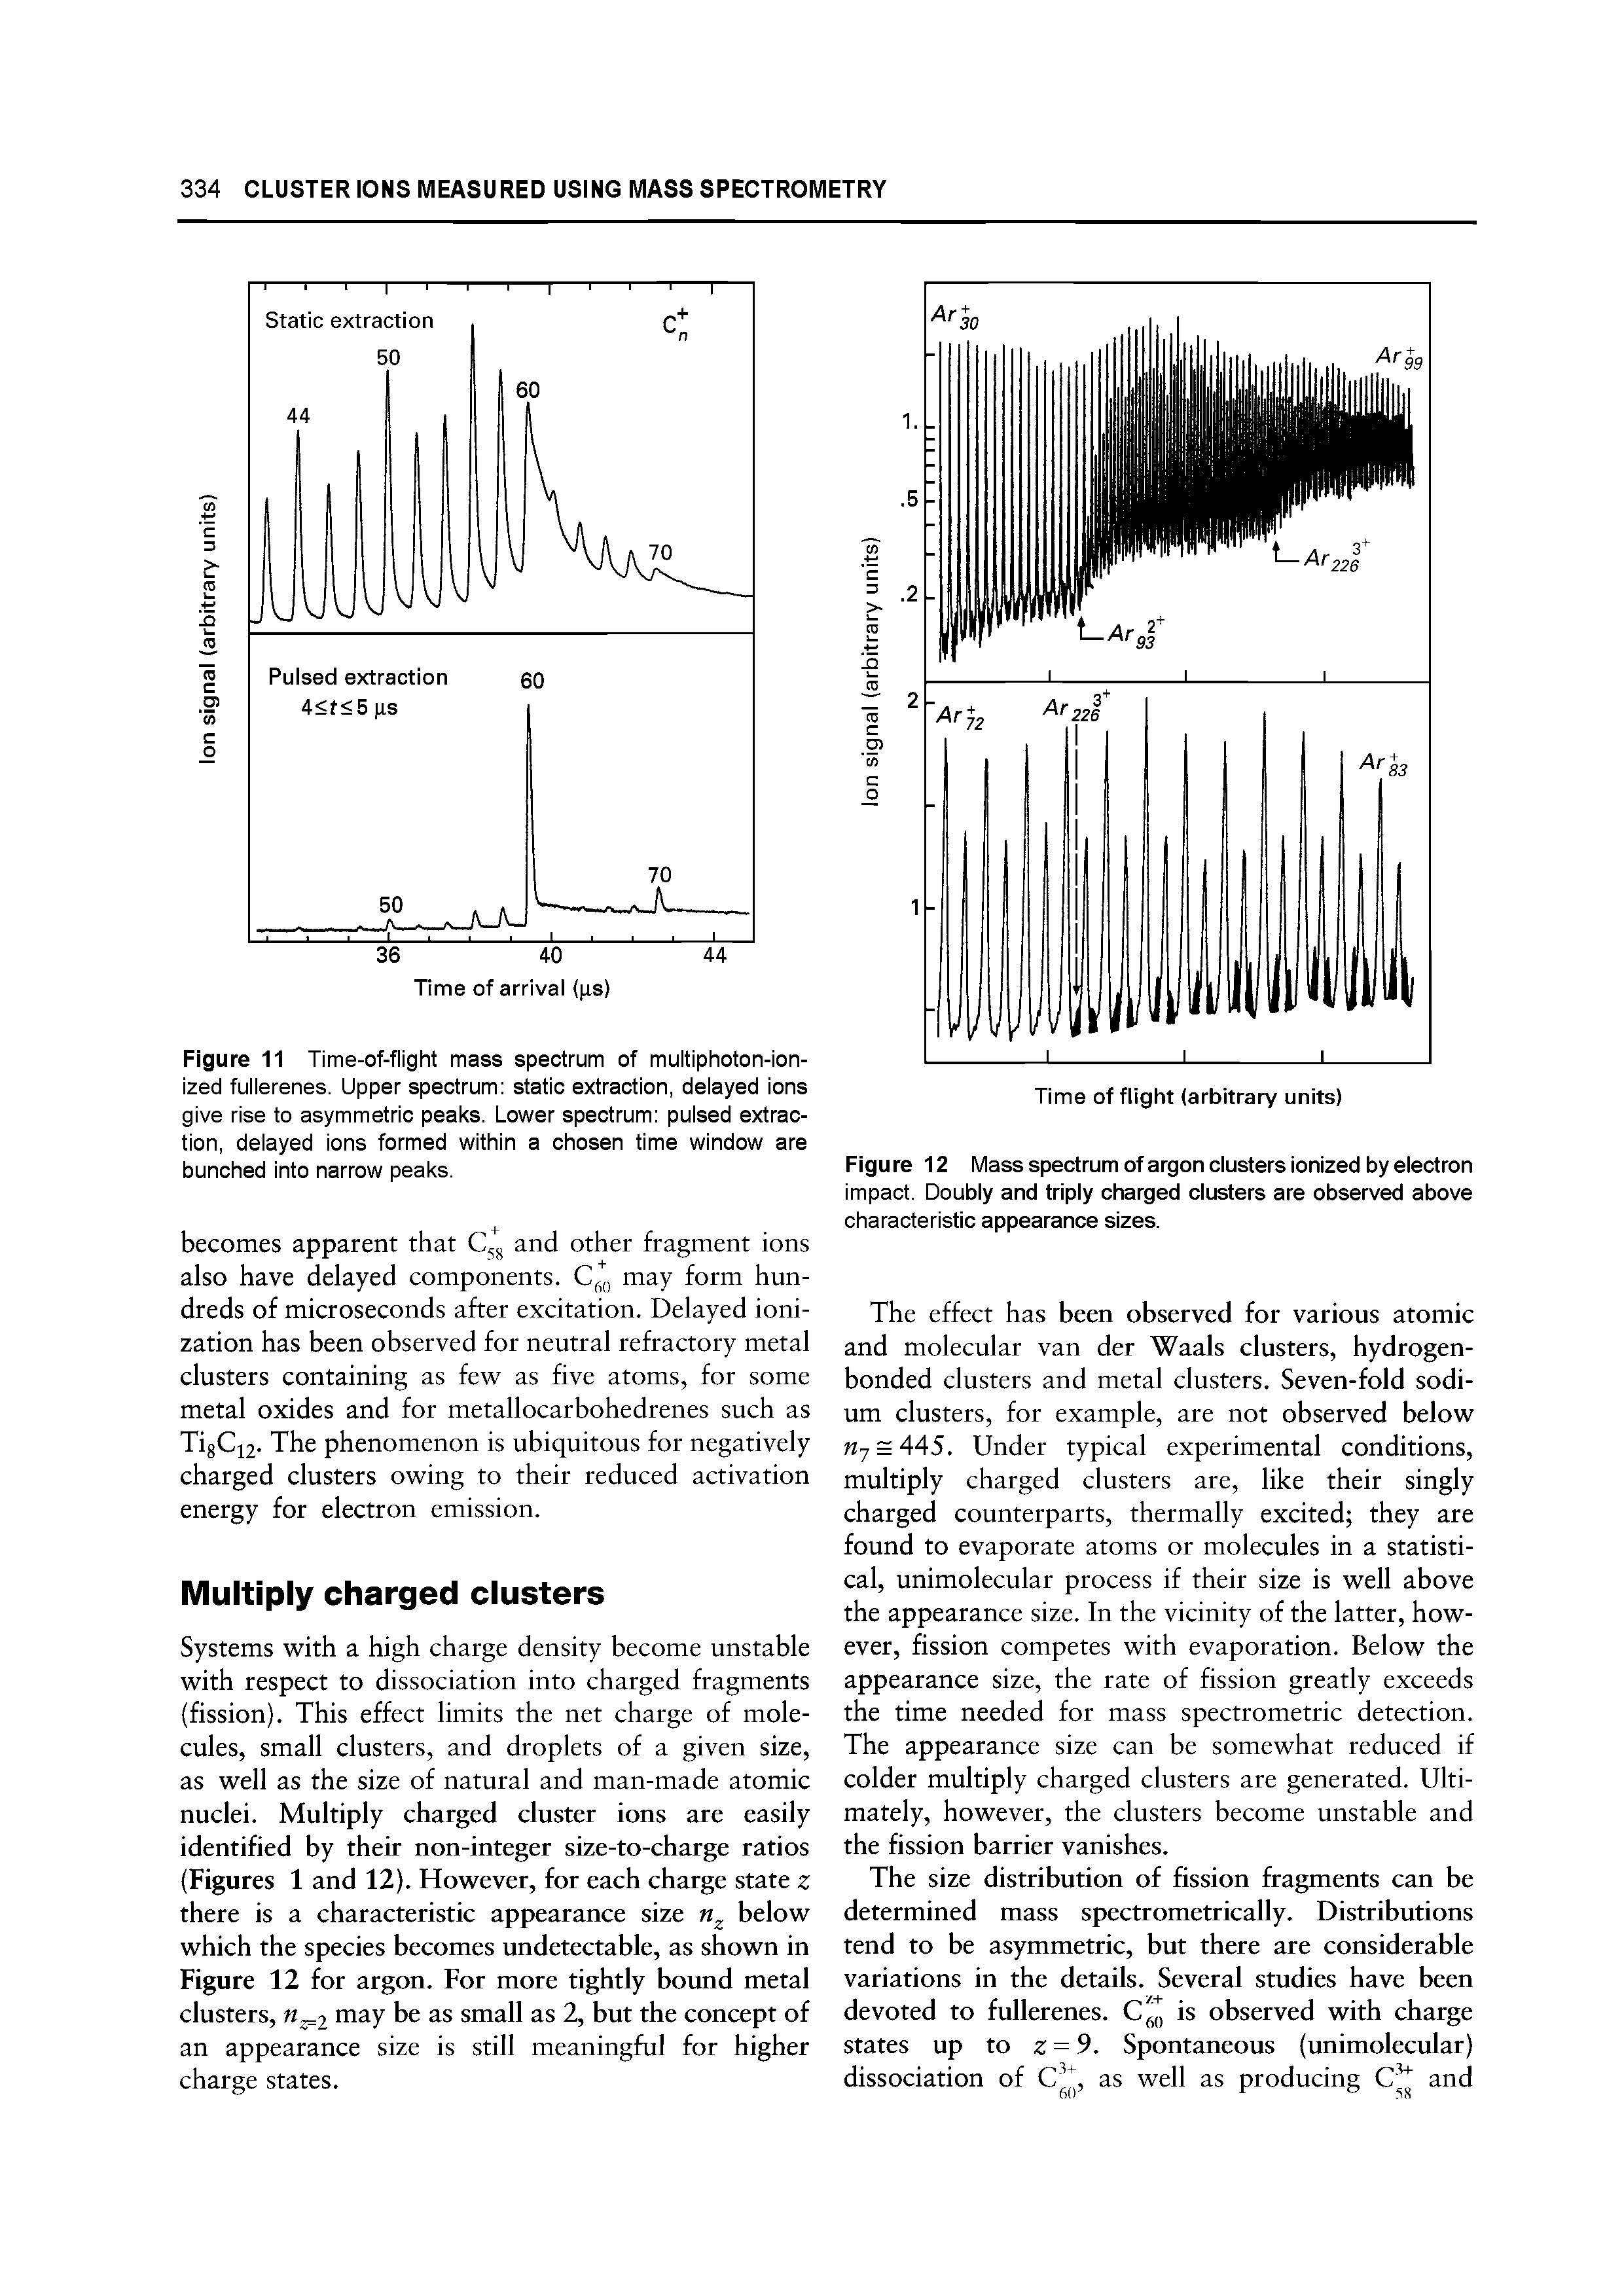 Figure 11 Time-of-flight mass spectrum of multiphoton-ion-ized fullerenes. Upper spectrum static extraction, delayed ions give rise to asymmetric peaks. Lower spectrum pulsed extraction, delayed ions formed within a chosen time window are bunched into narrow peaks.